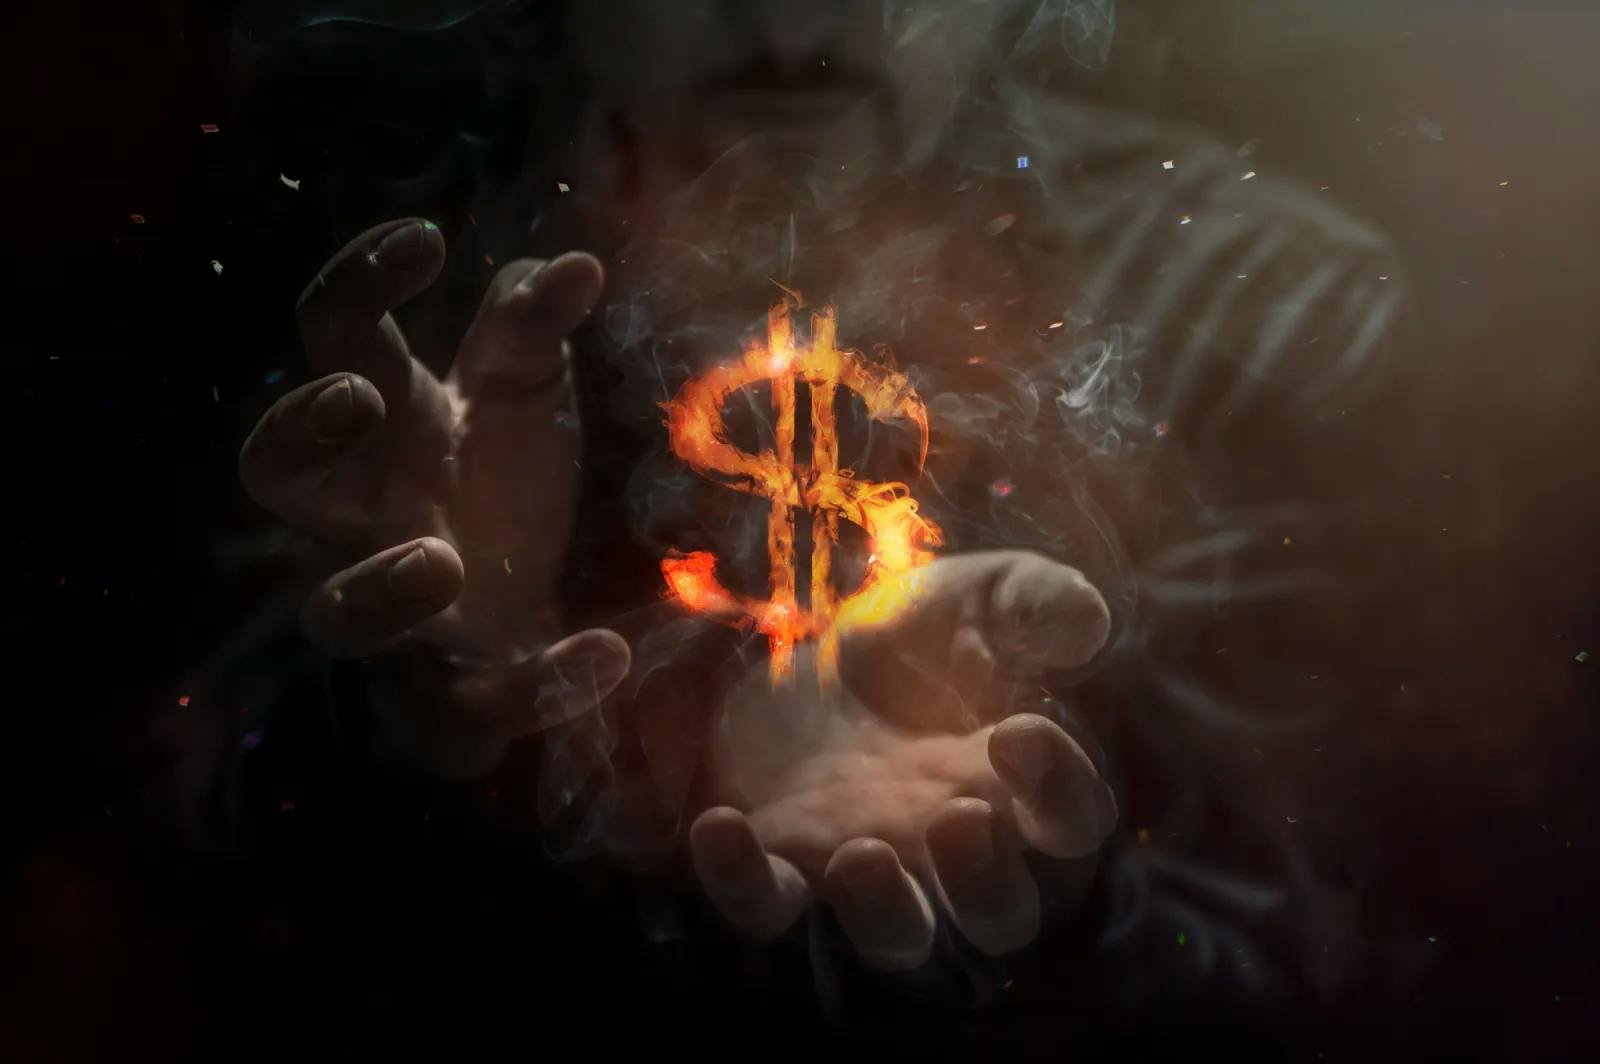 Money sign on fire